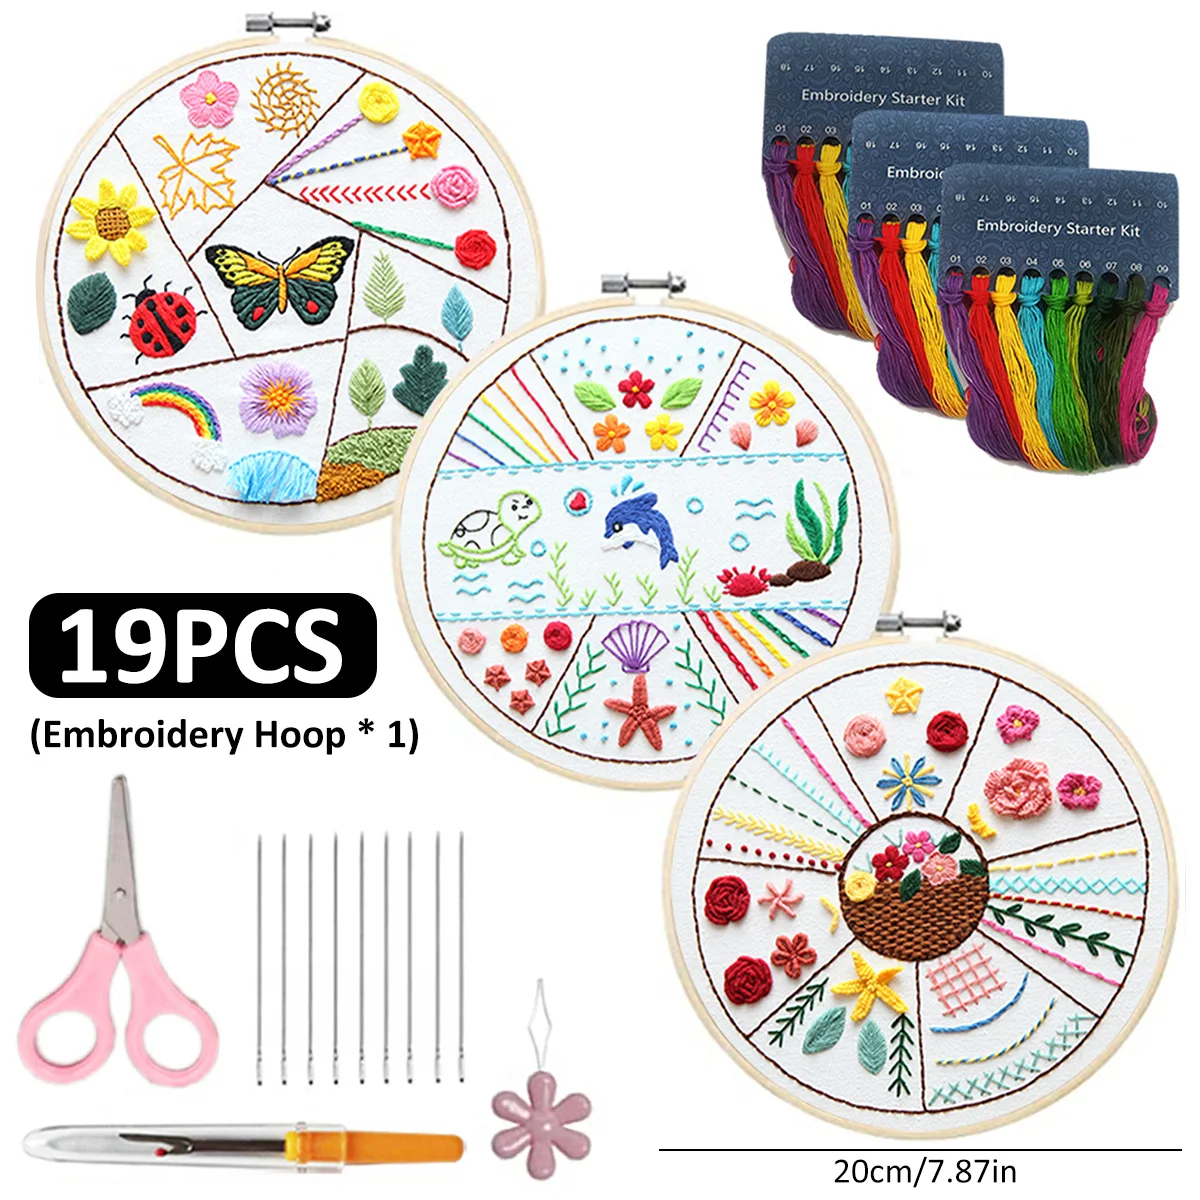 4 Sets Cat Embroidery Kit For Beginners With Printed Patterns, Hoops And  Instructions, Cross Stitch Sewing Practice Set, Suitable For Adult  Beginners